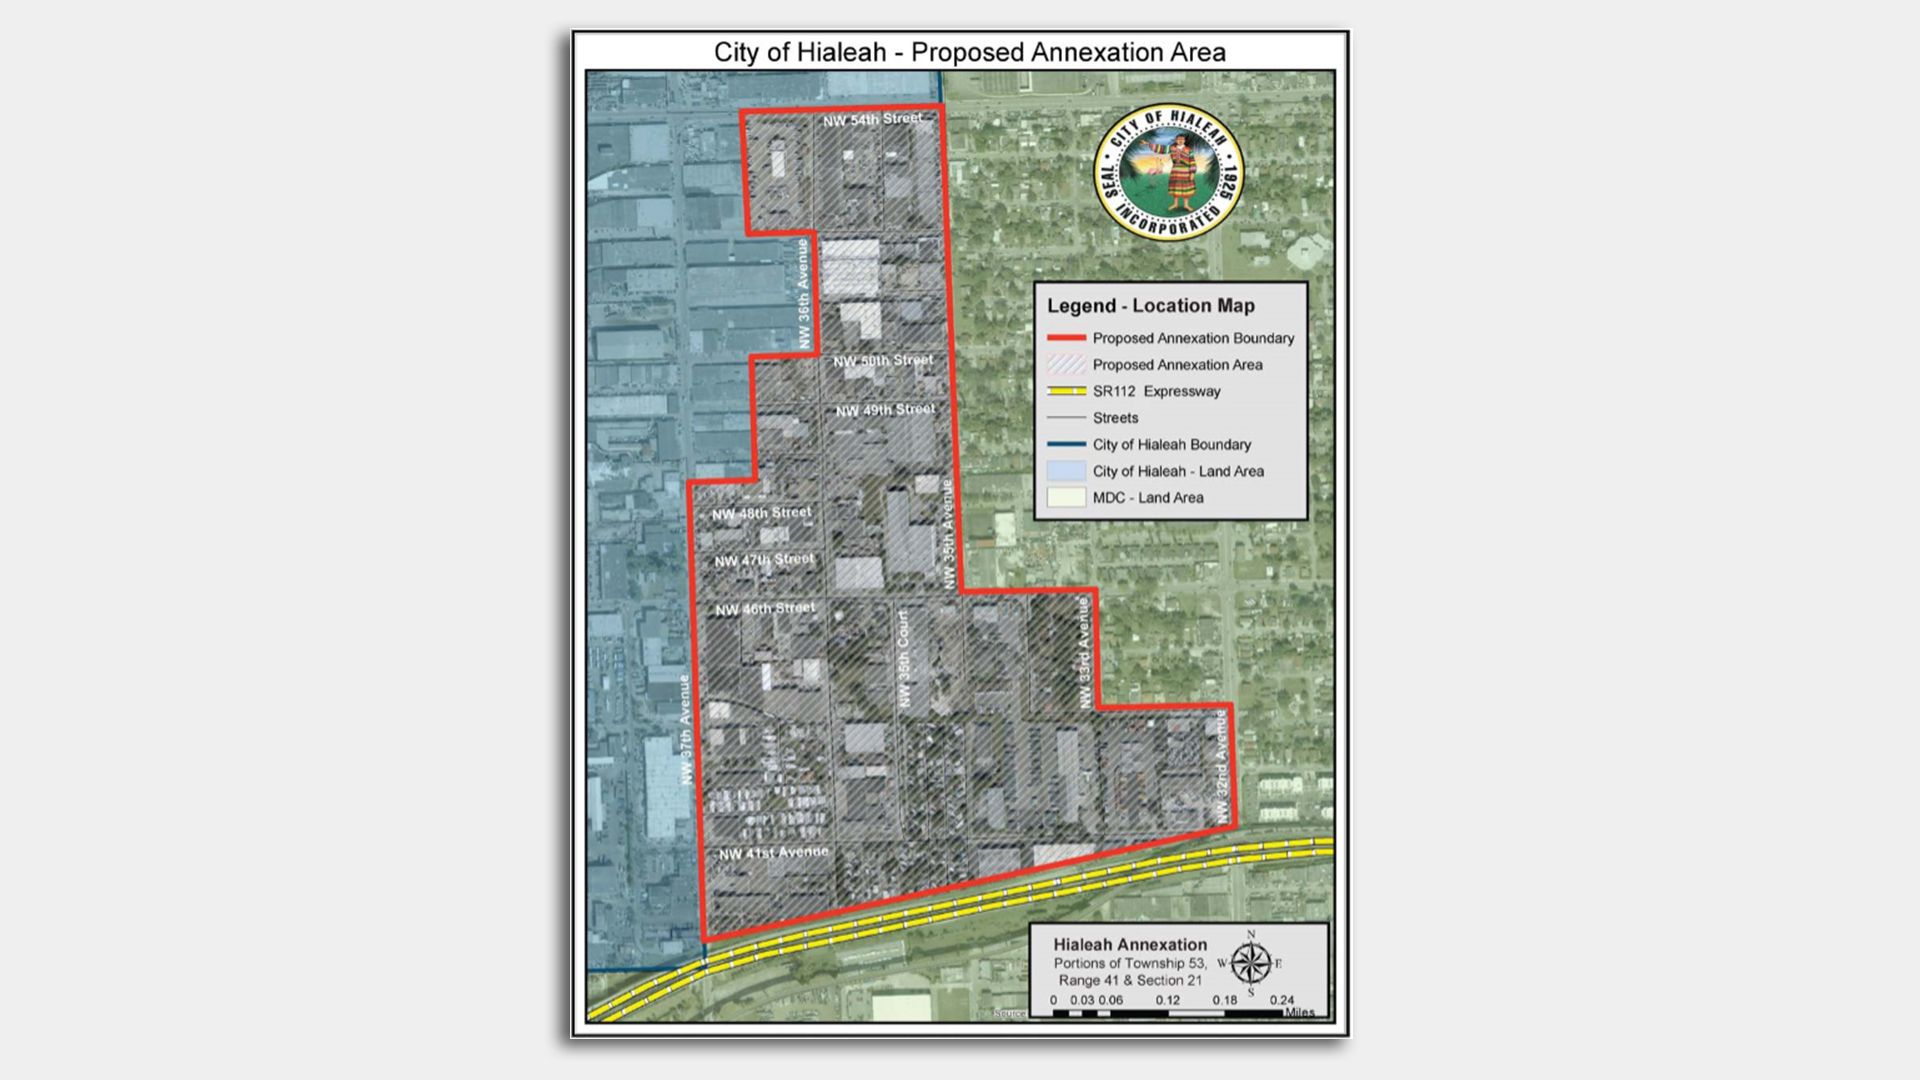 A map shows an area of Miami-Dade County that could be annexed by Hialeah. Image: City of Hialeah via Kenneth Kilpatrick 